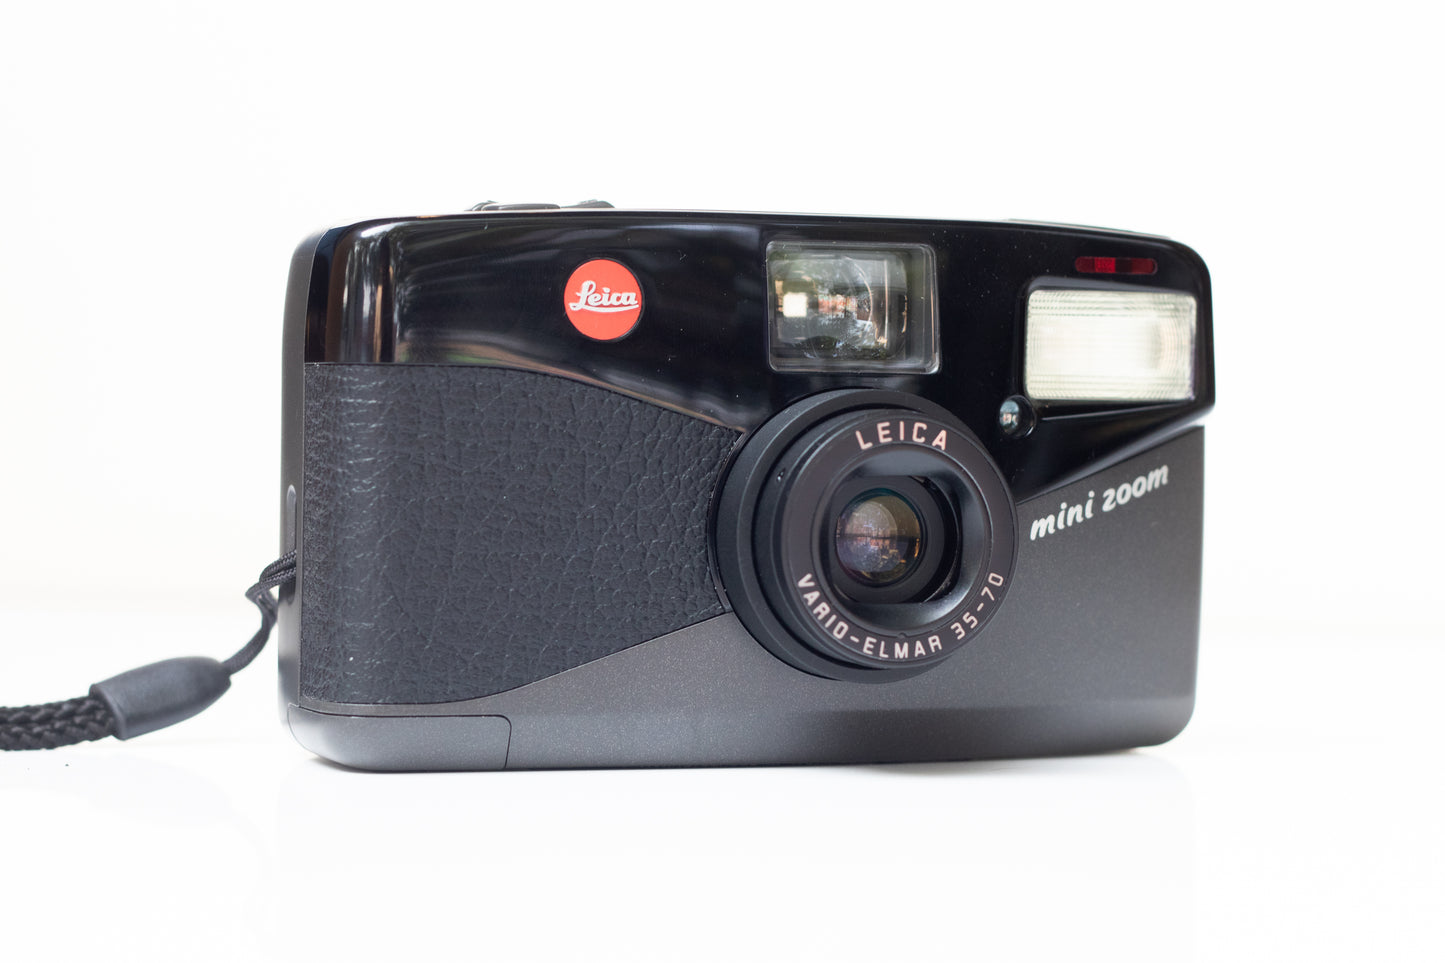 Leica Mini Zoom | 35mm High End Point and Shoot | Film Camera | Mint Condition